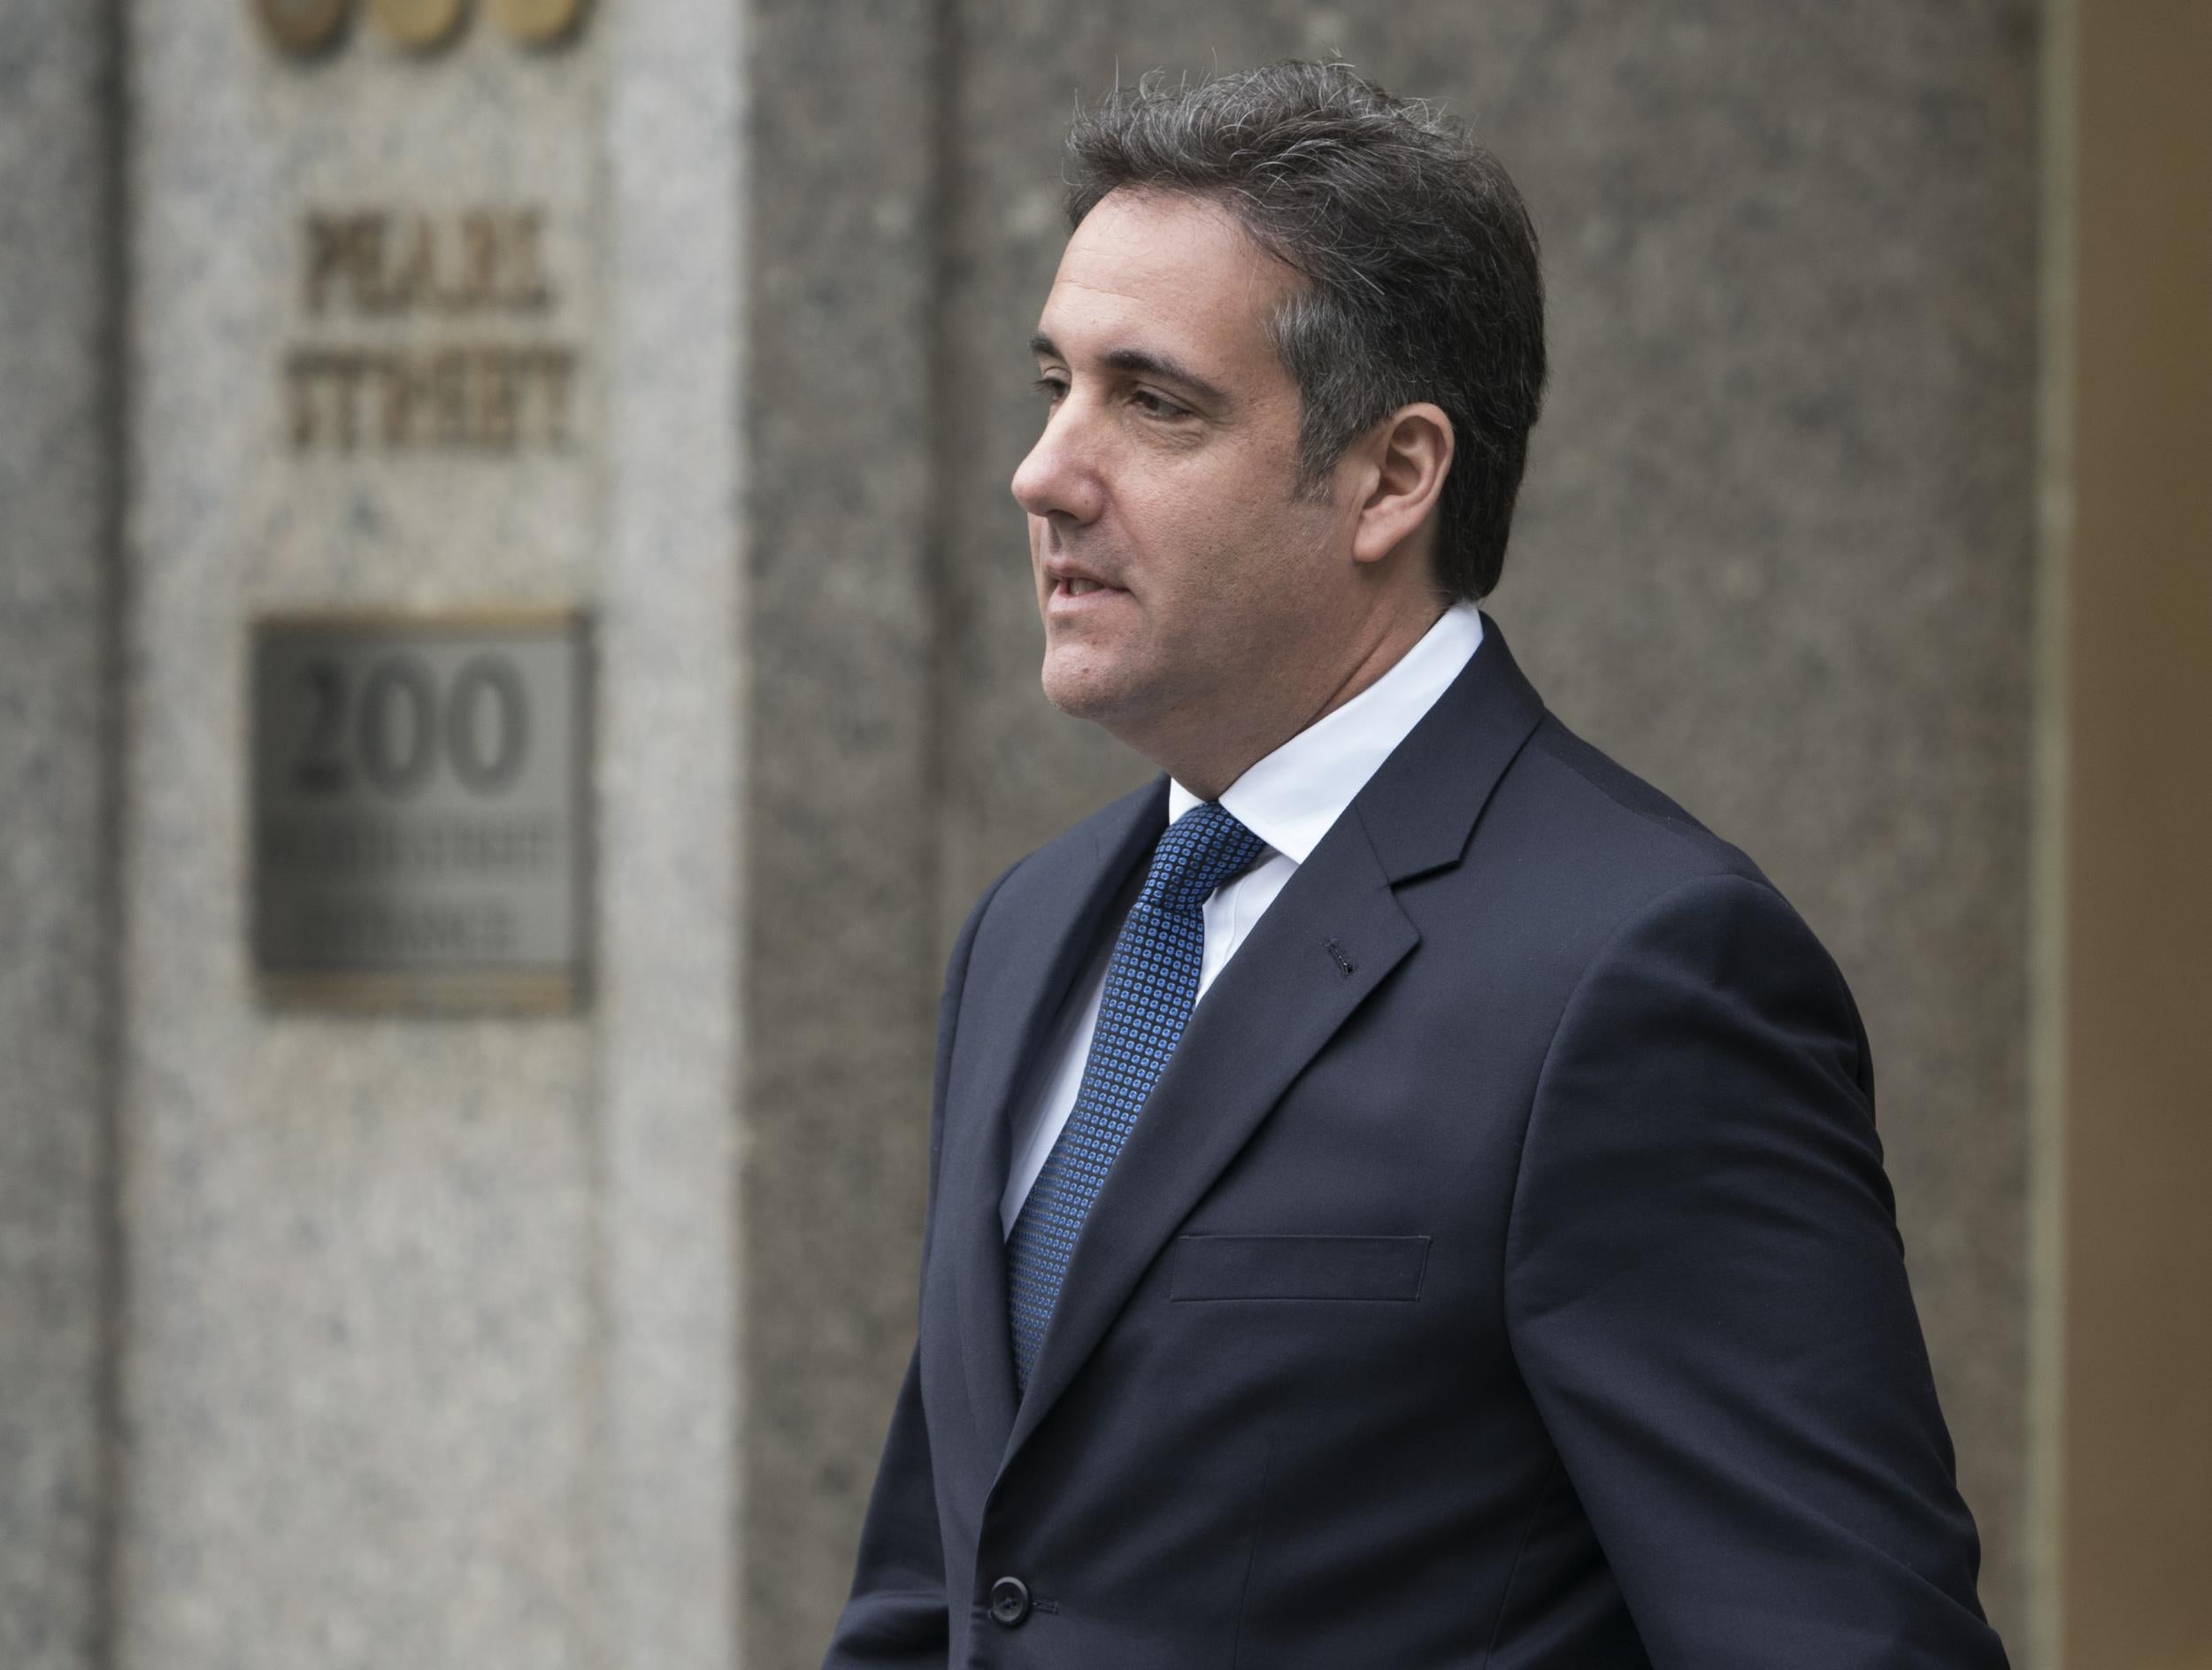 Michael Cohen, a longtime personal lawyer and confidante for President Donald Trump, leaves the United States District Court Southern District of New York